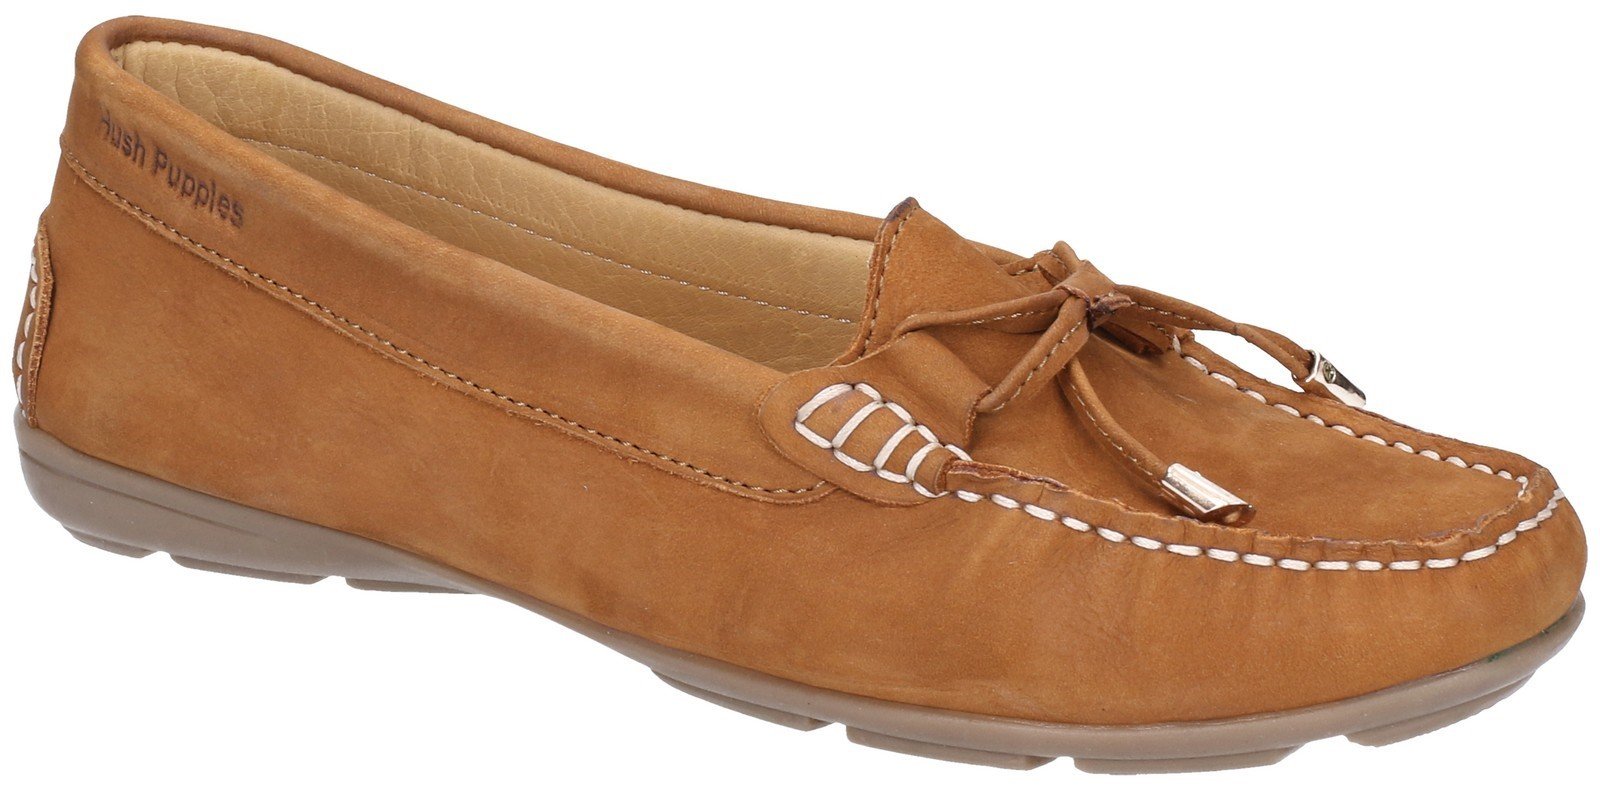 Hush Puppies Women's Maggie Slip On Loafer Shoe Various Colours 28405 - Tan 3